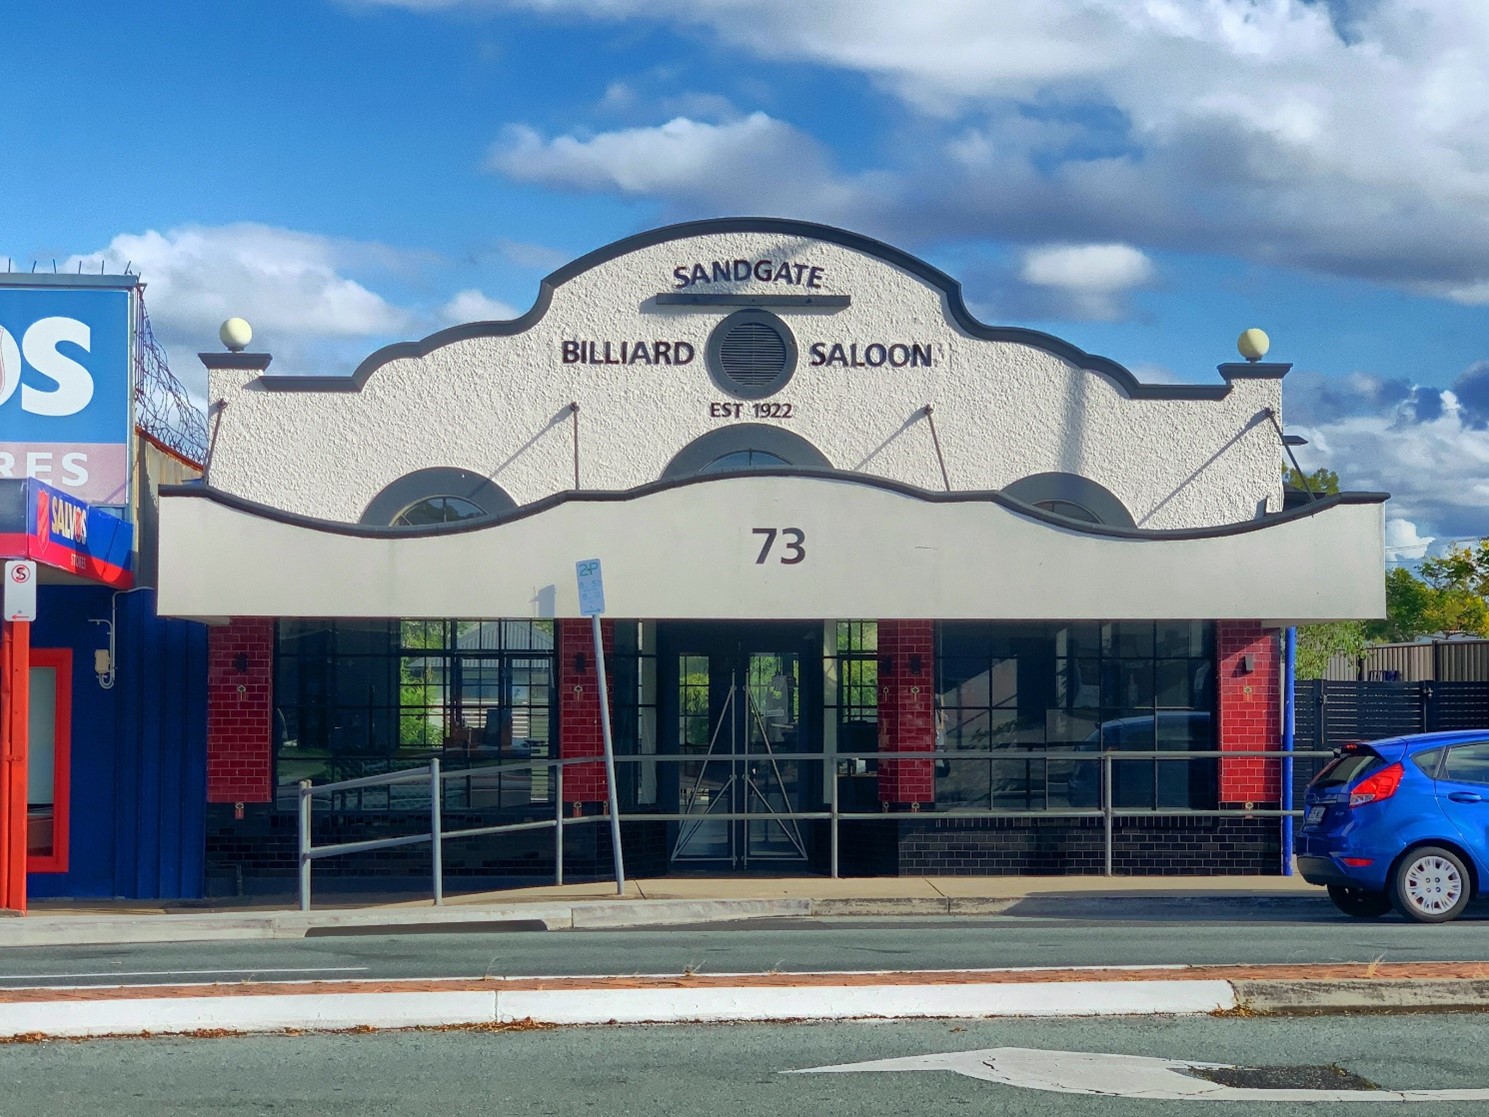 This is an image of the local heritage place known as the Sandgate Billiard Saloon (former).